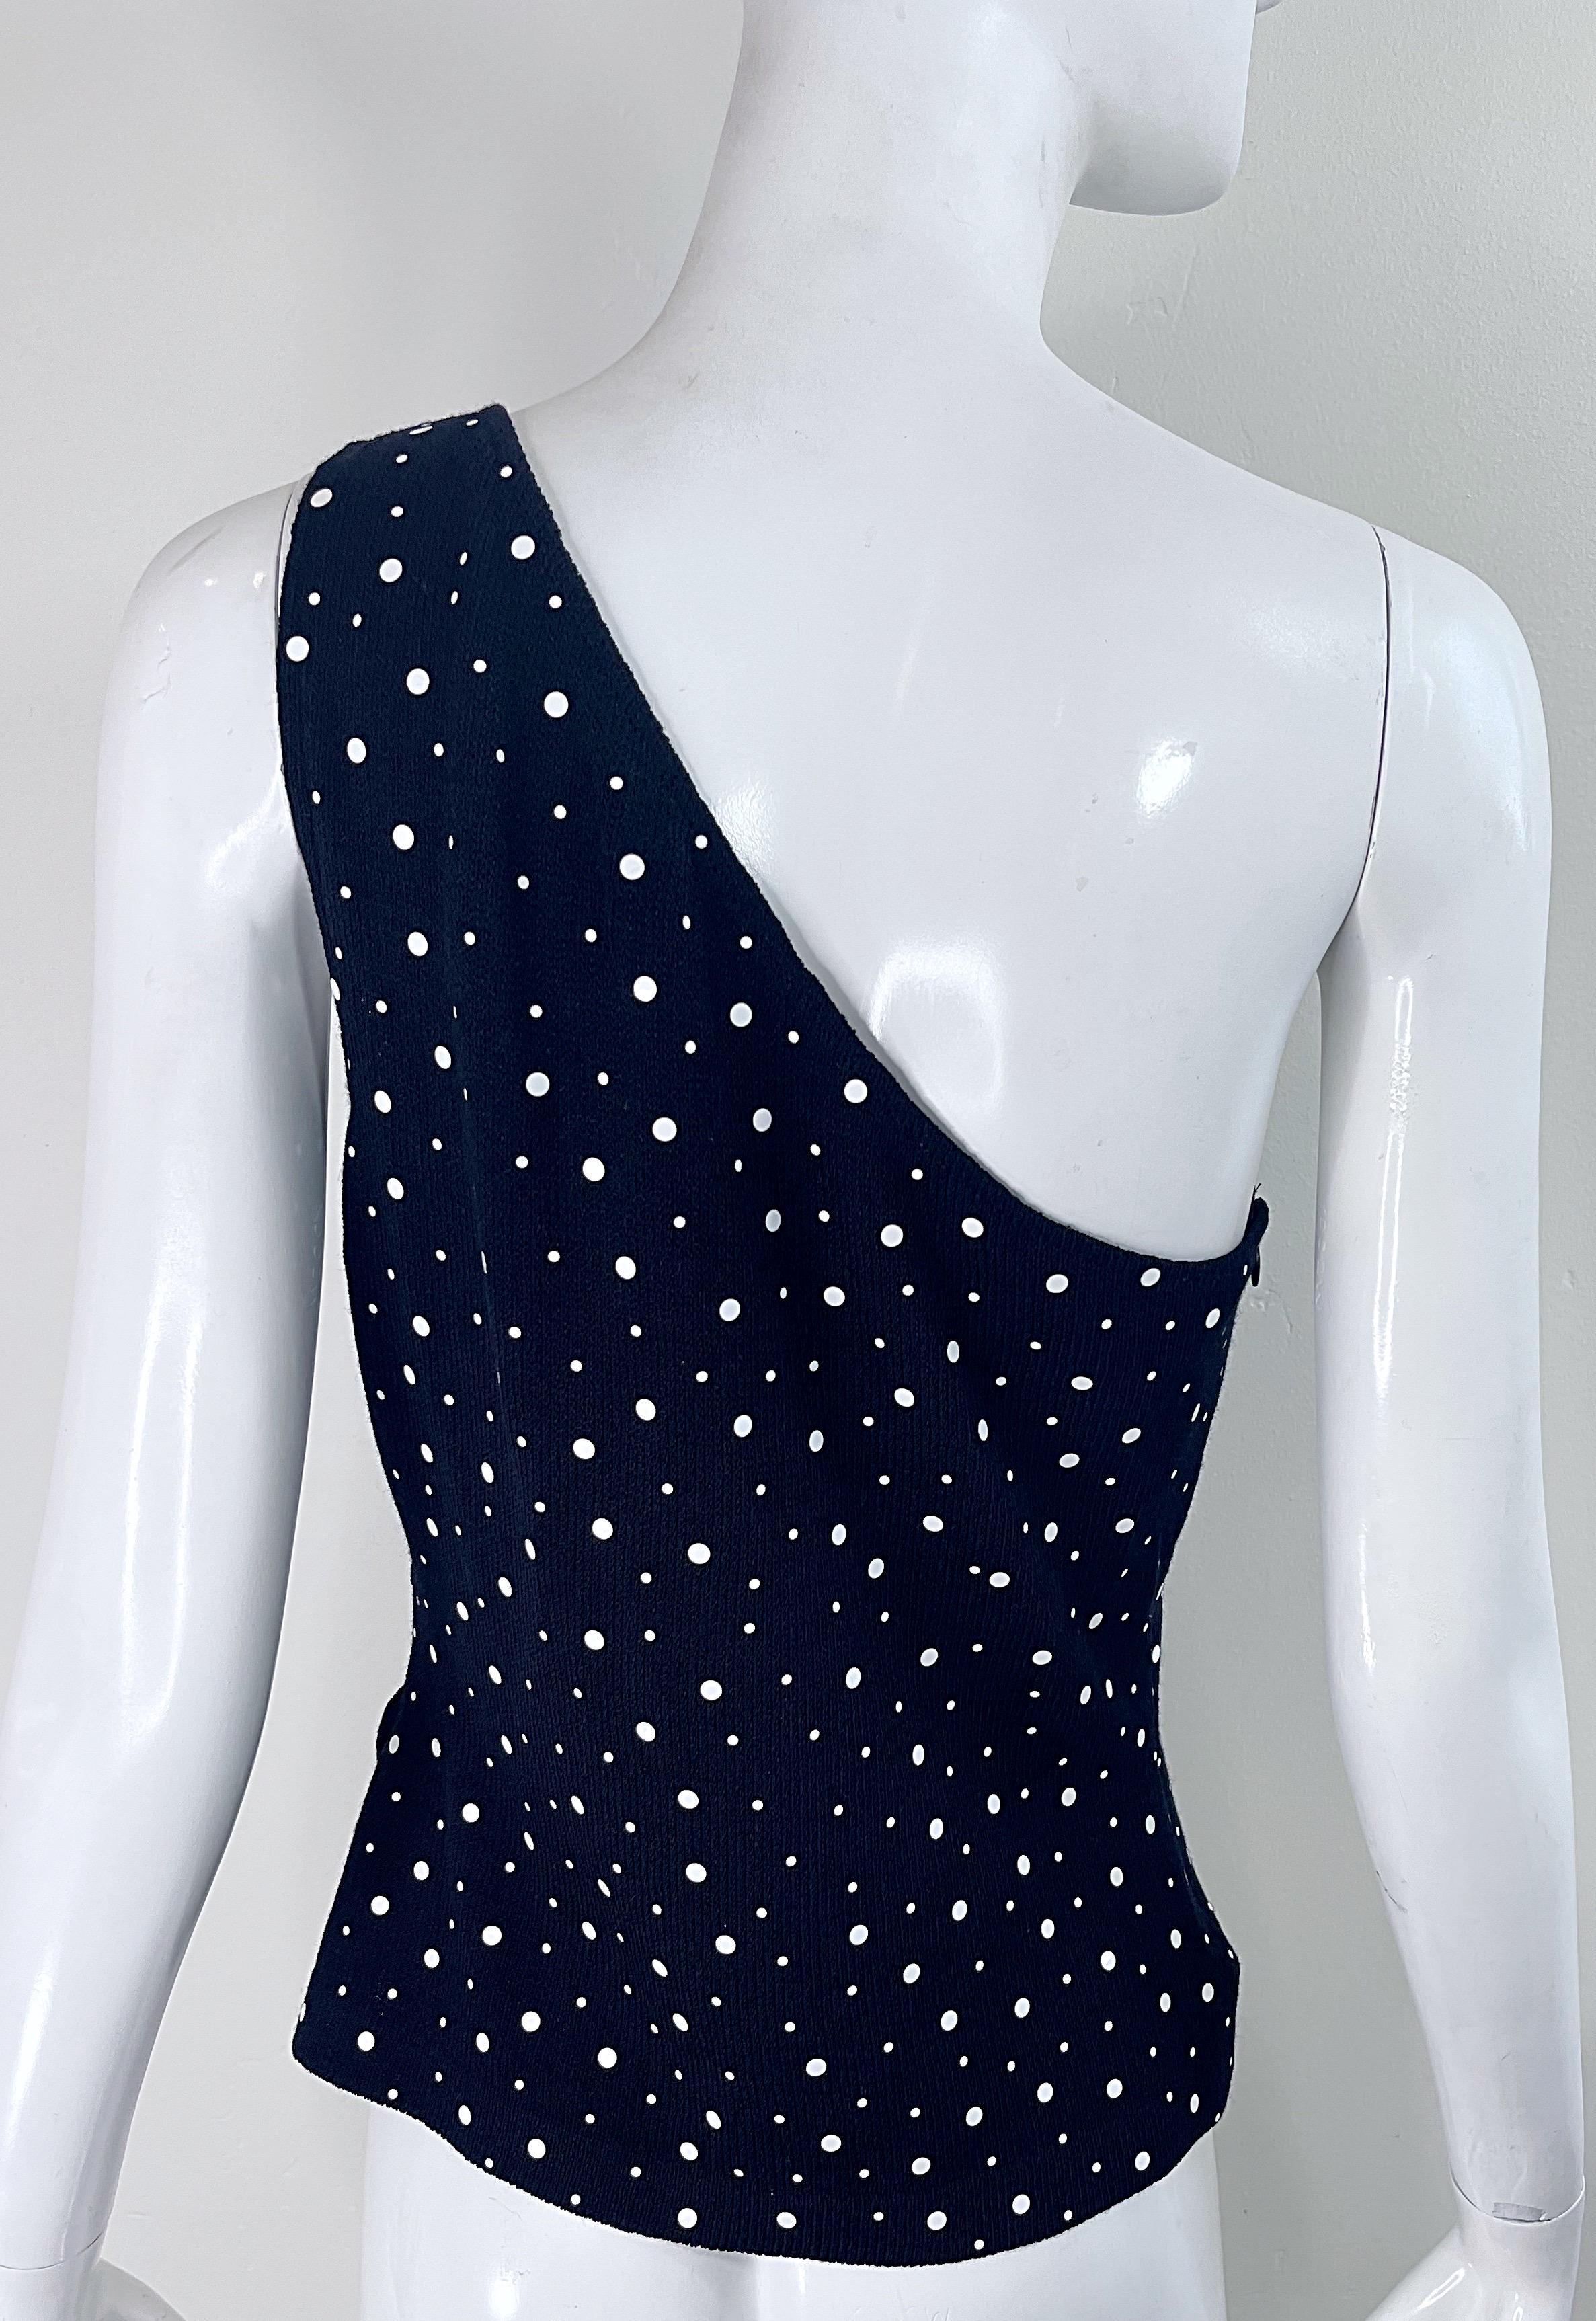 NWT 1990 I. Johns Collection by Marie Gray Size 8 Black White Polka Dot Top en vente 4